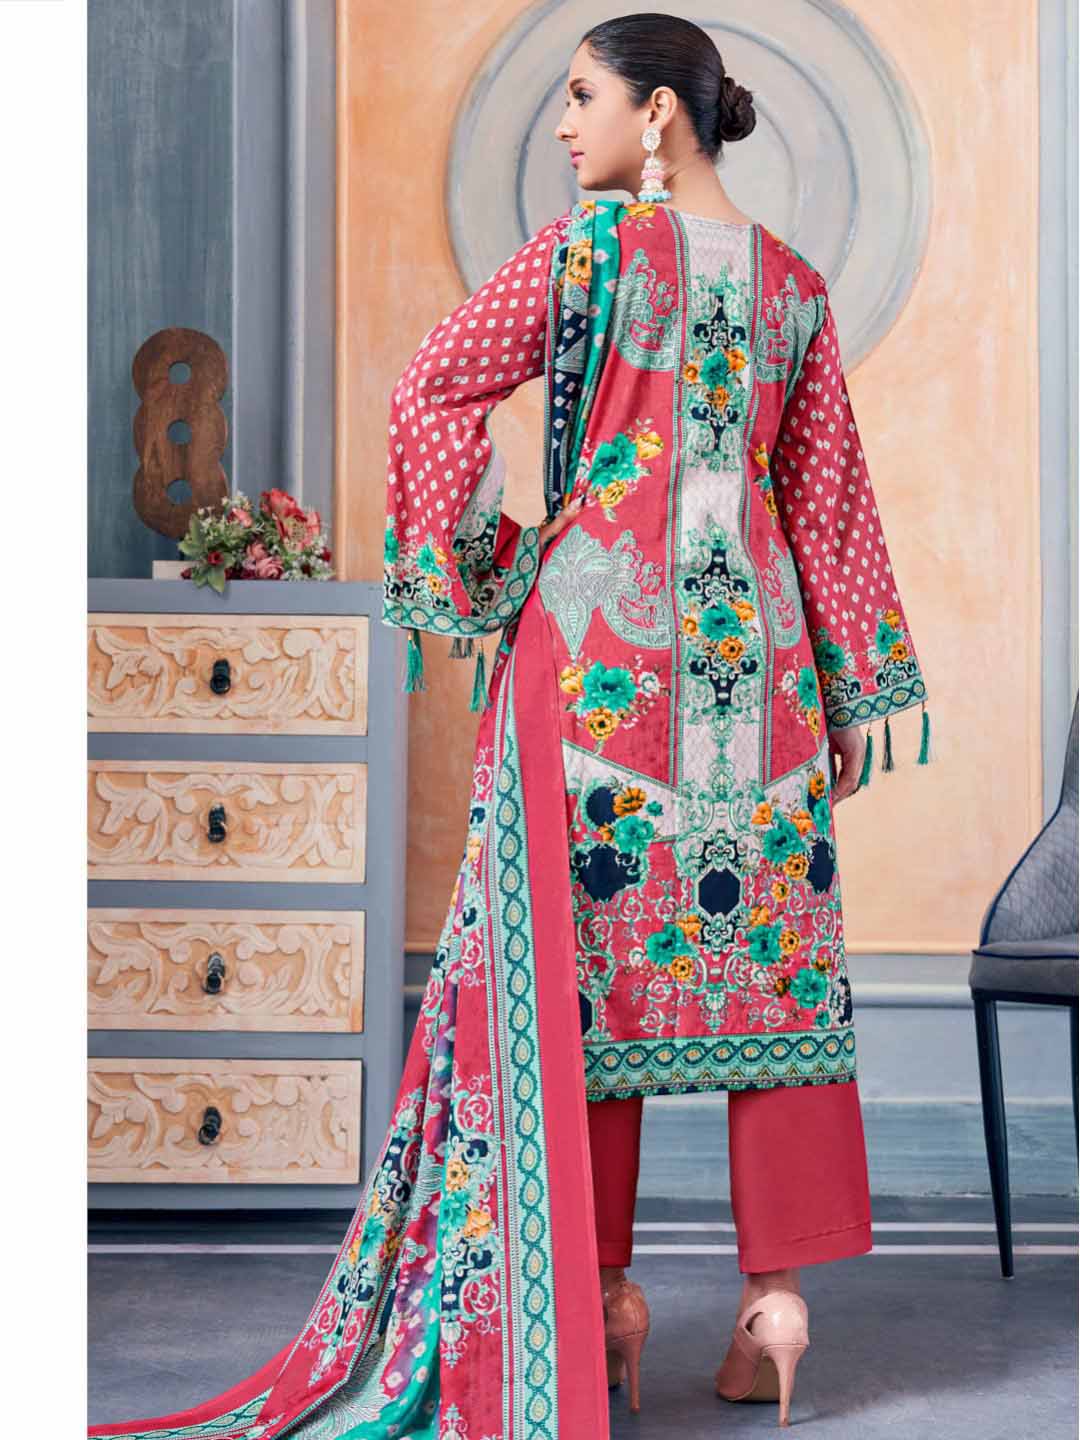 Unstitched Pakistani Print Cotton Suit Fabric with Embroidery Pink Alok Suit